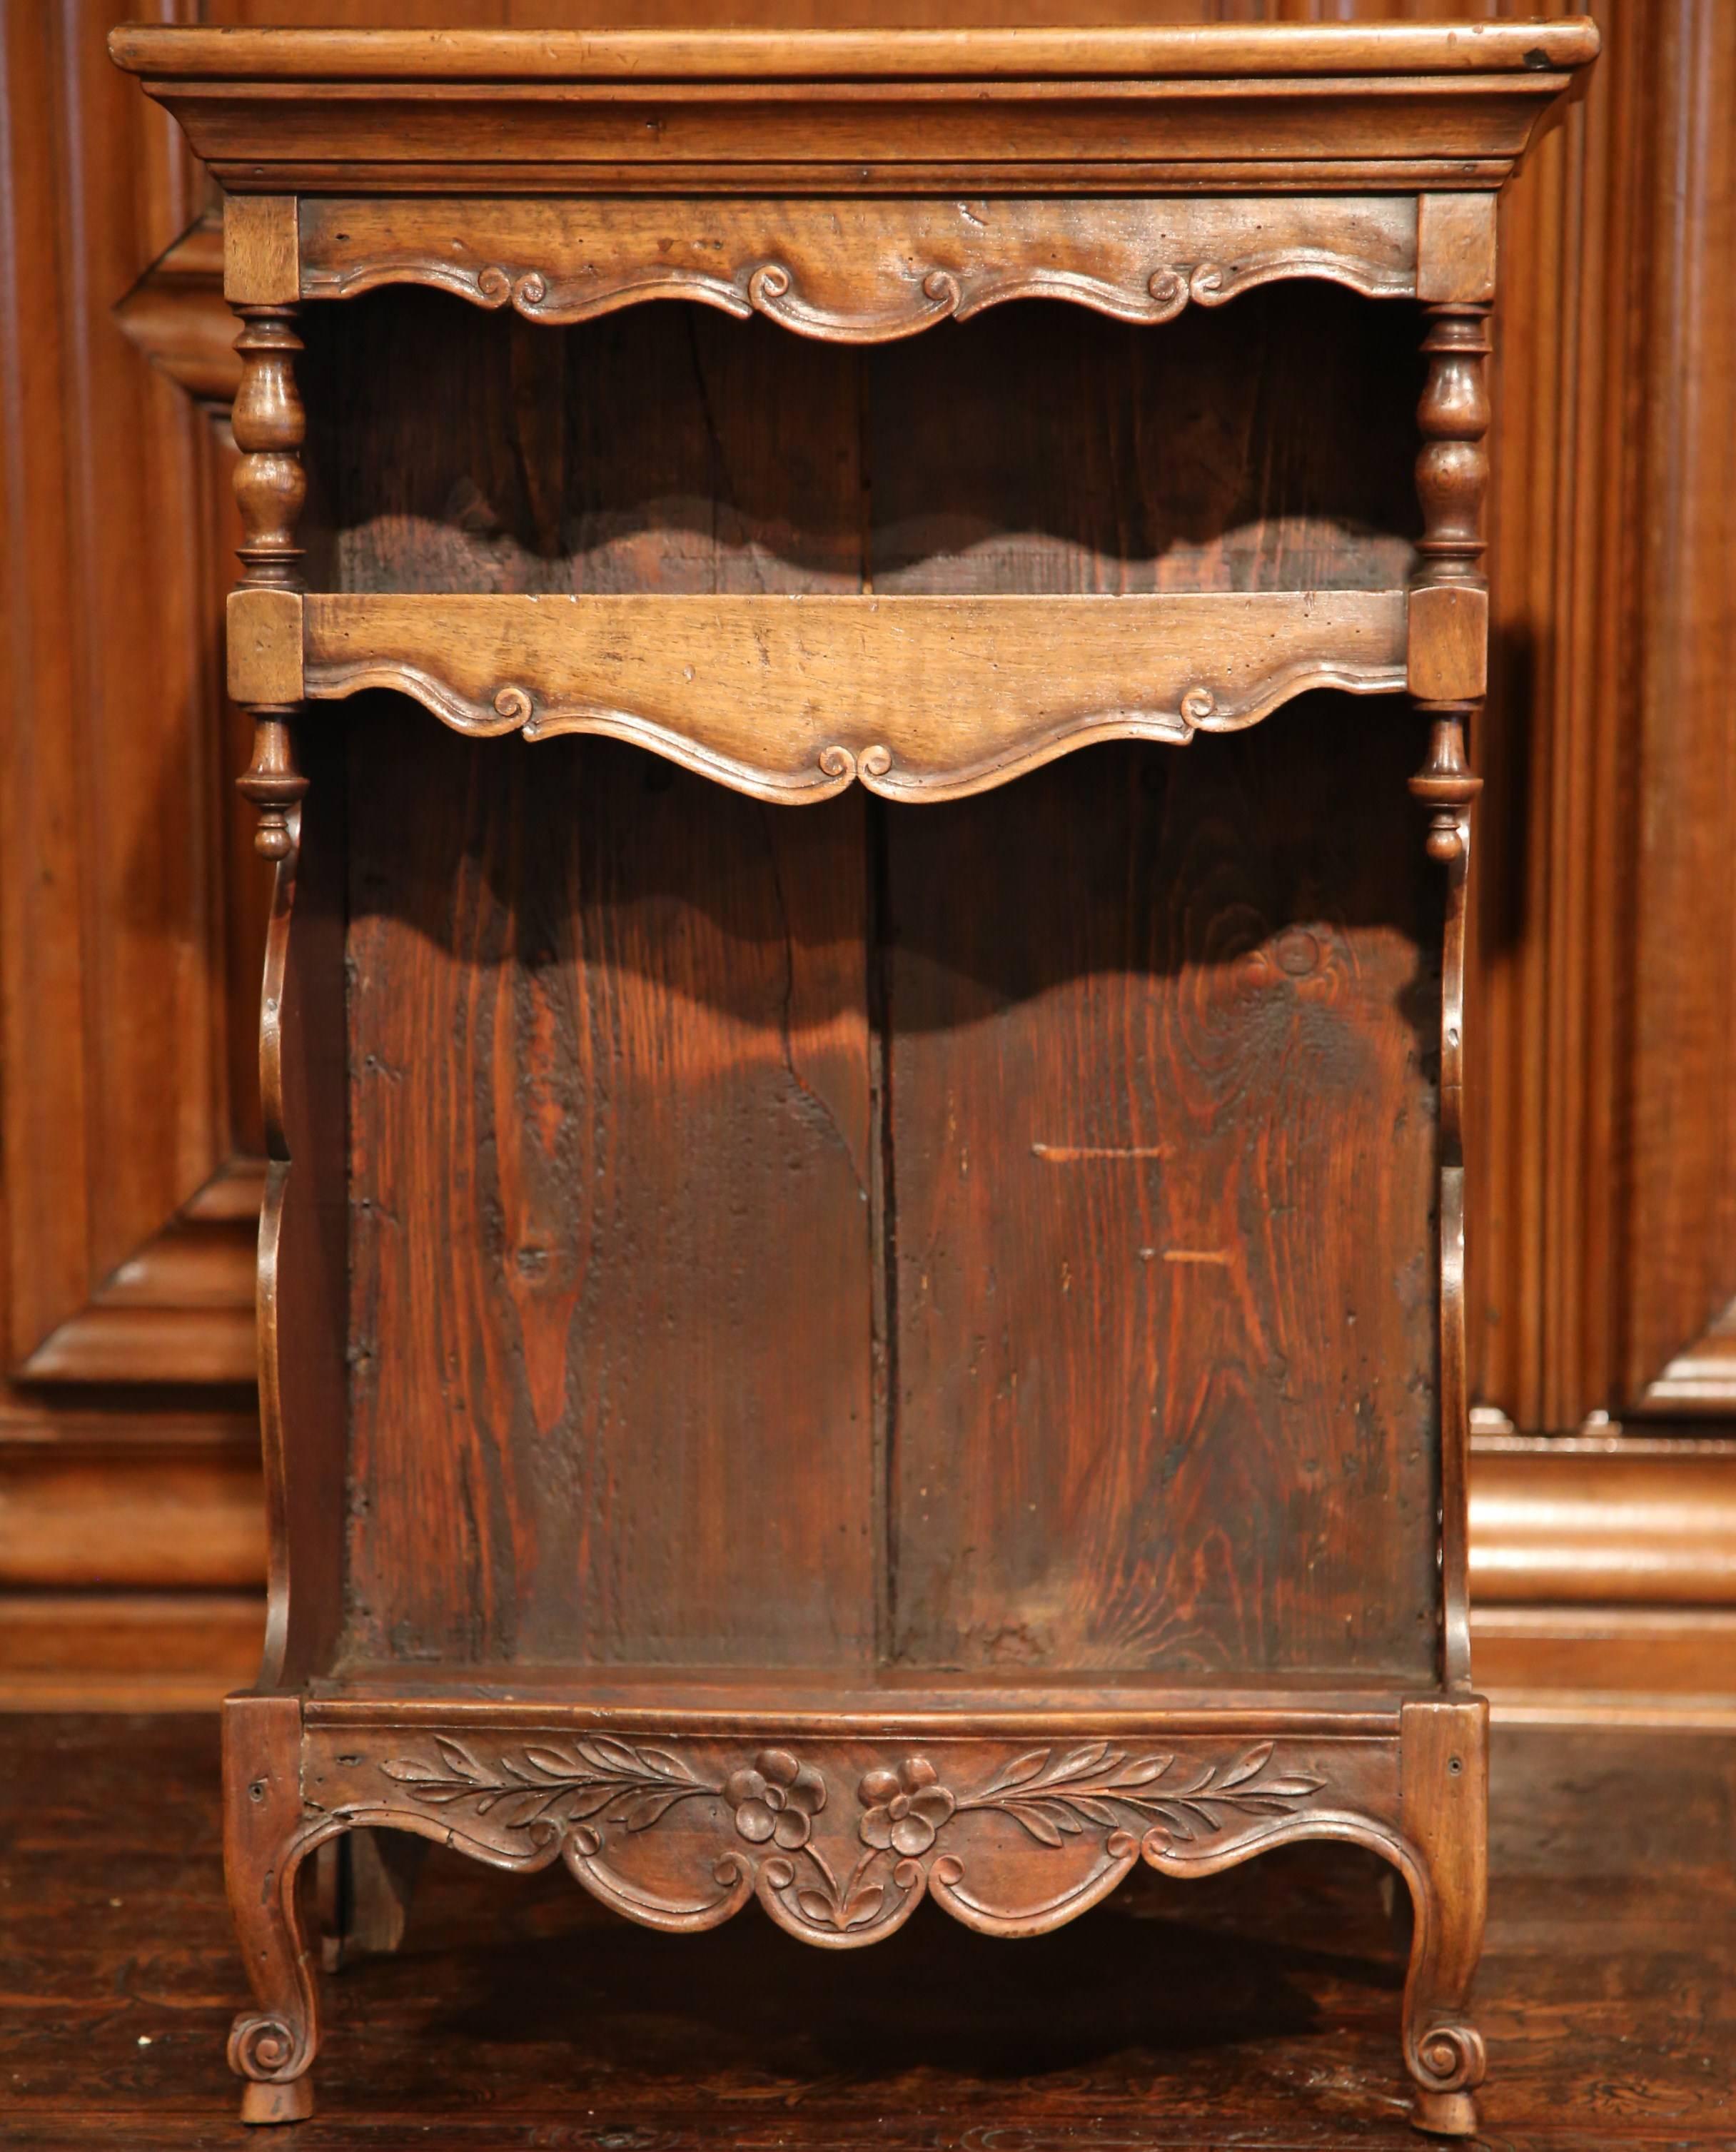 This elegant, small, fruitwood antique cabinet was crafted in Avignon, France, circa 1870. Made out of walnut, the open shelf sits on small front scroll legs with escargot feet, and features a scalloped apron embellished with floral and leaf motifs.